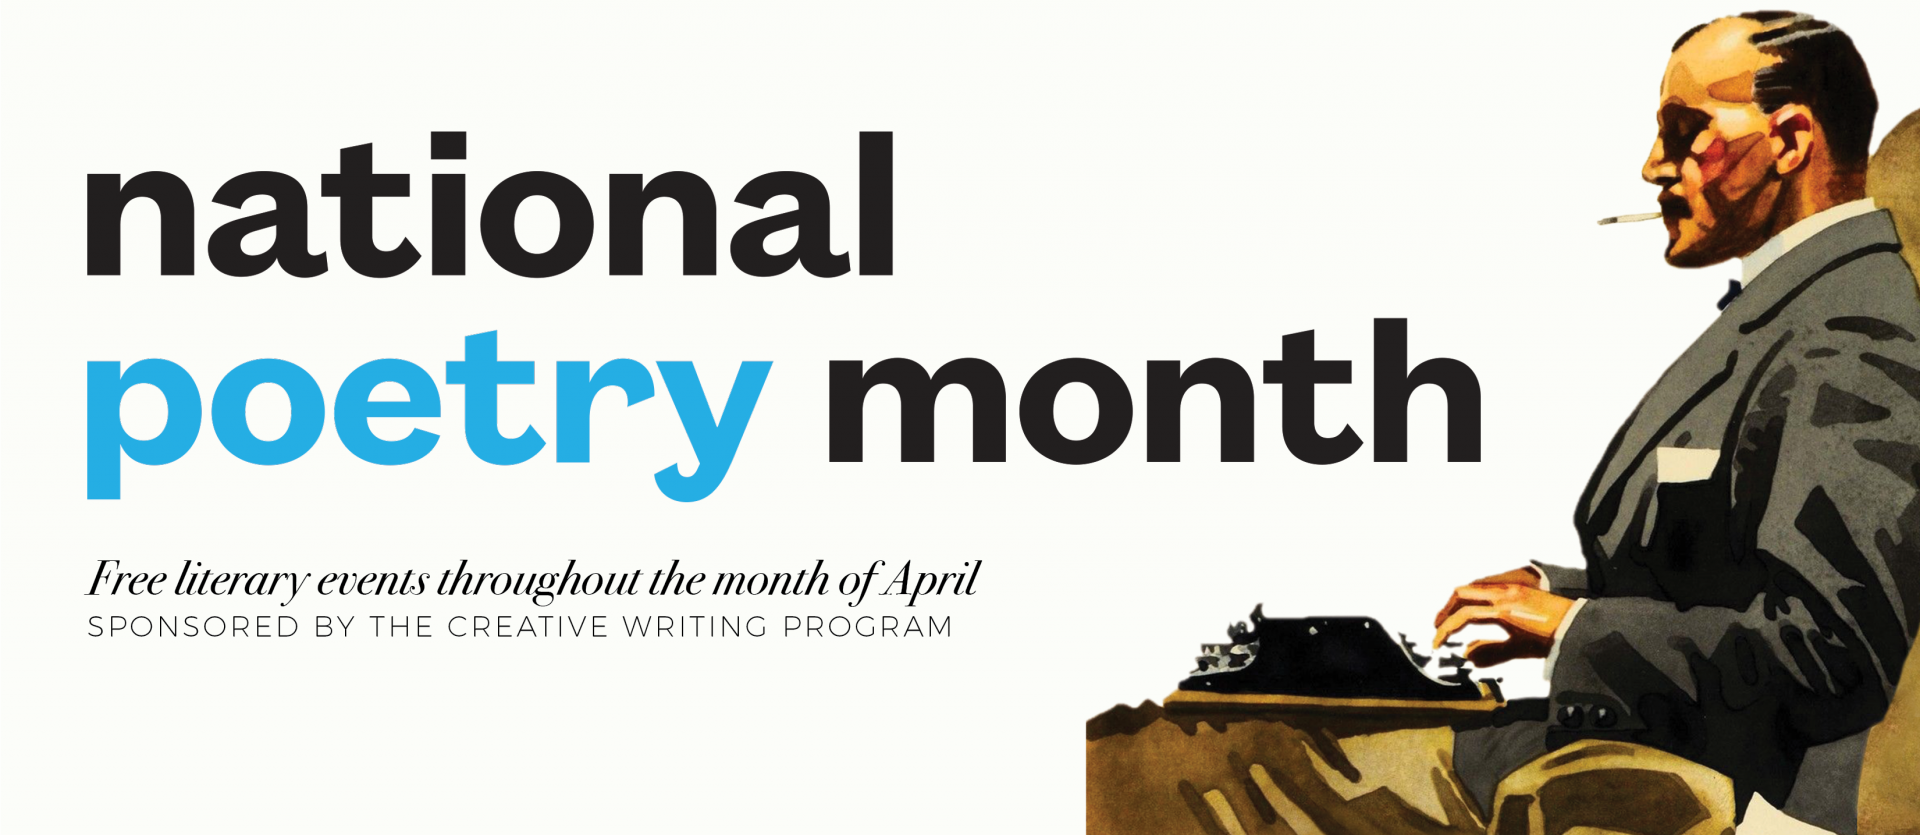 National Poetry Month advertisement with illustration of a man typing on a typewriter